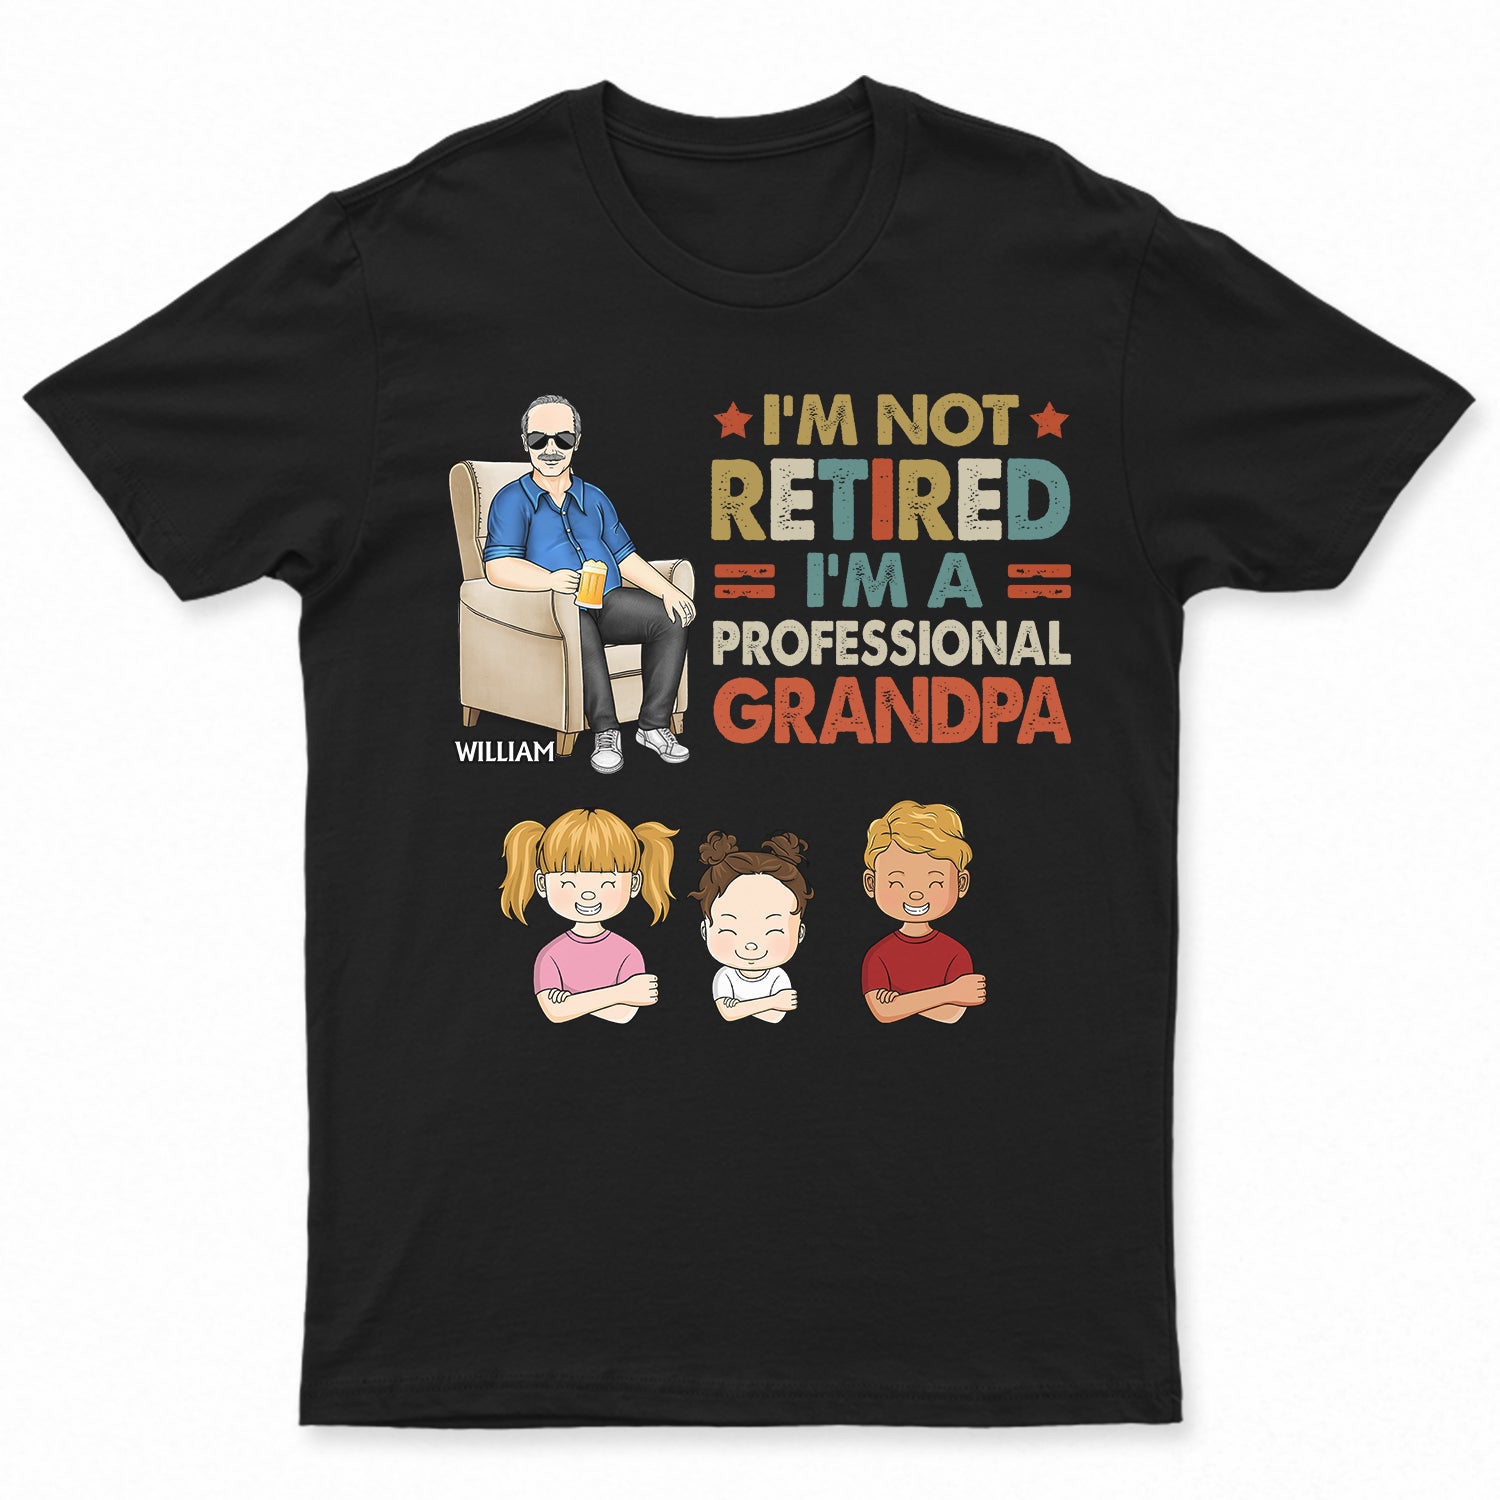 I'm Not Retired I'm A Professional Grandpa - Gift For Dad, Father, Grandfather - Personalized Custom T Shirt